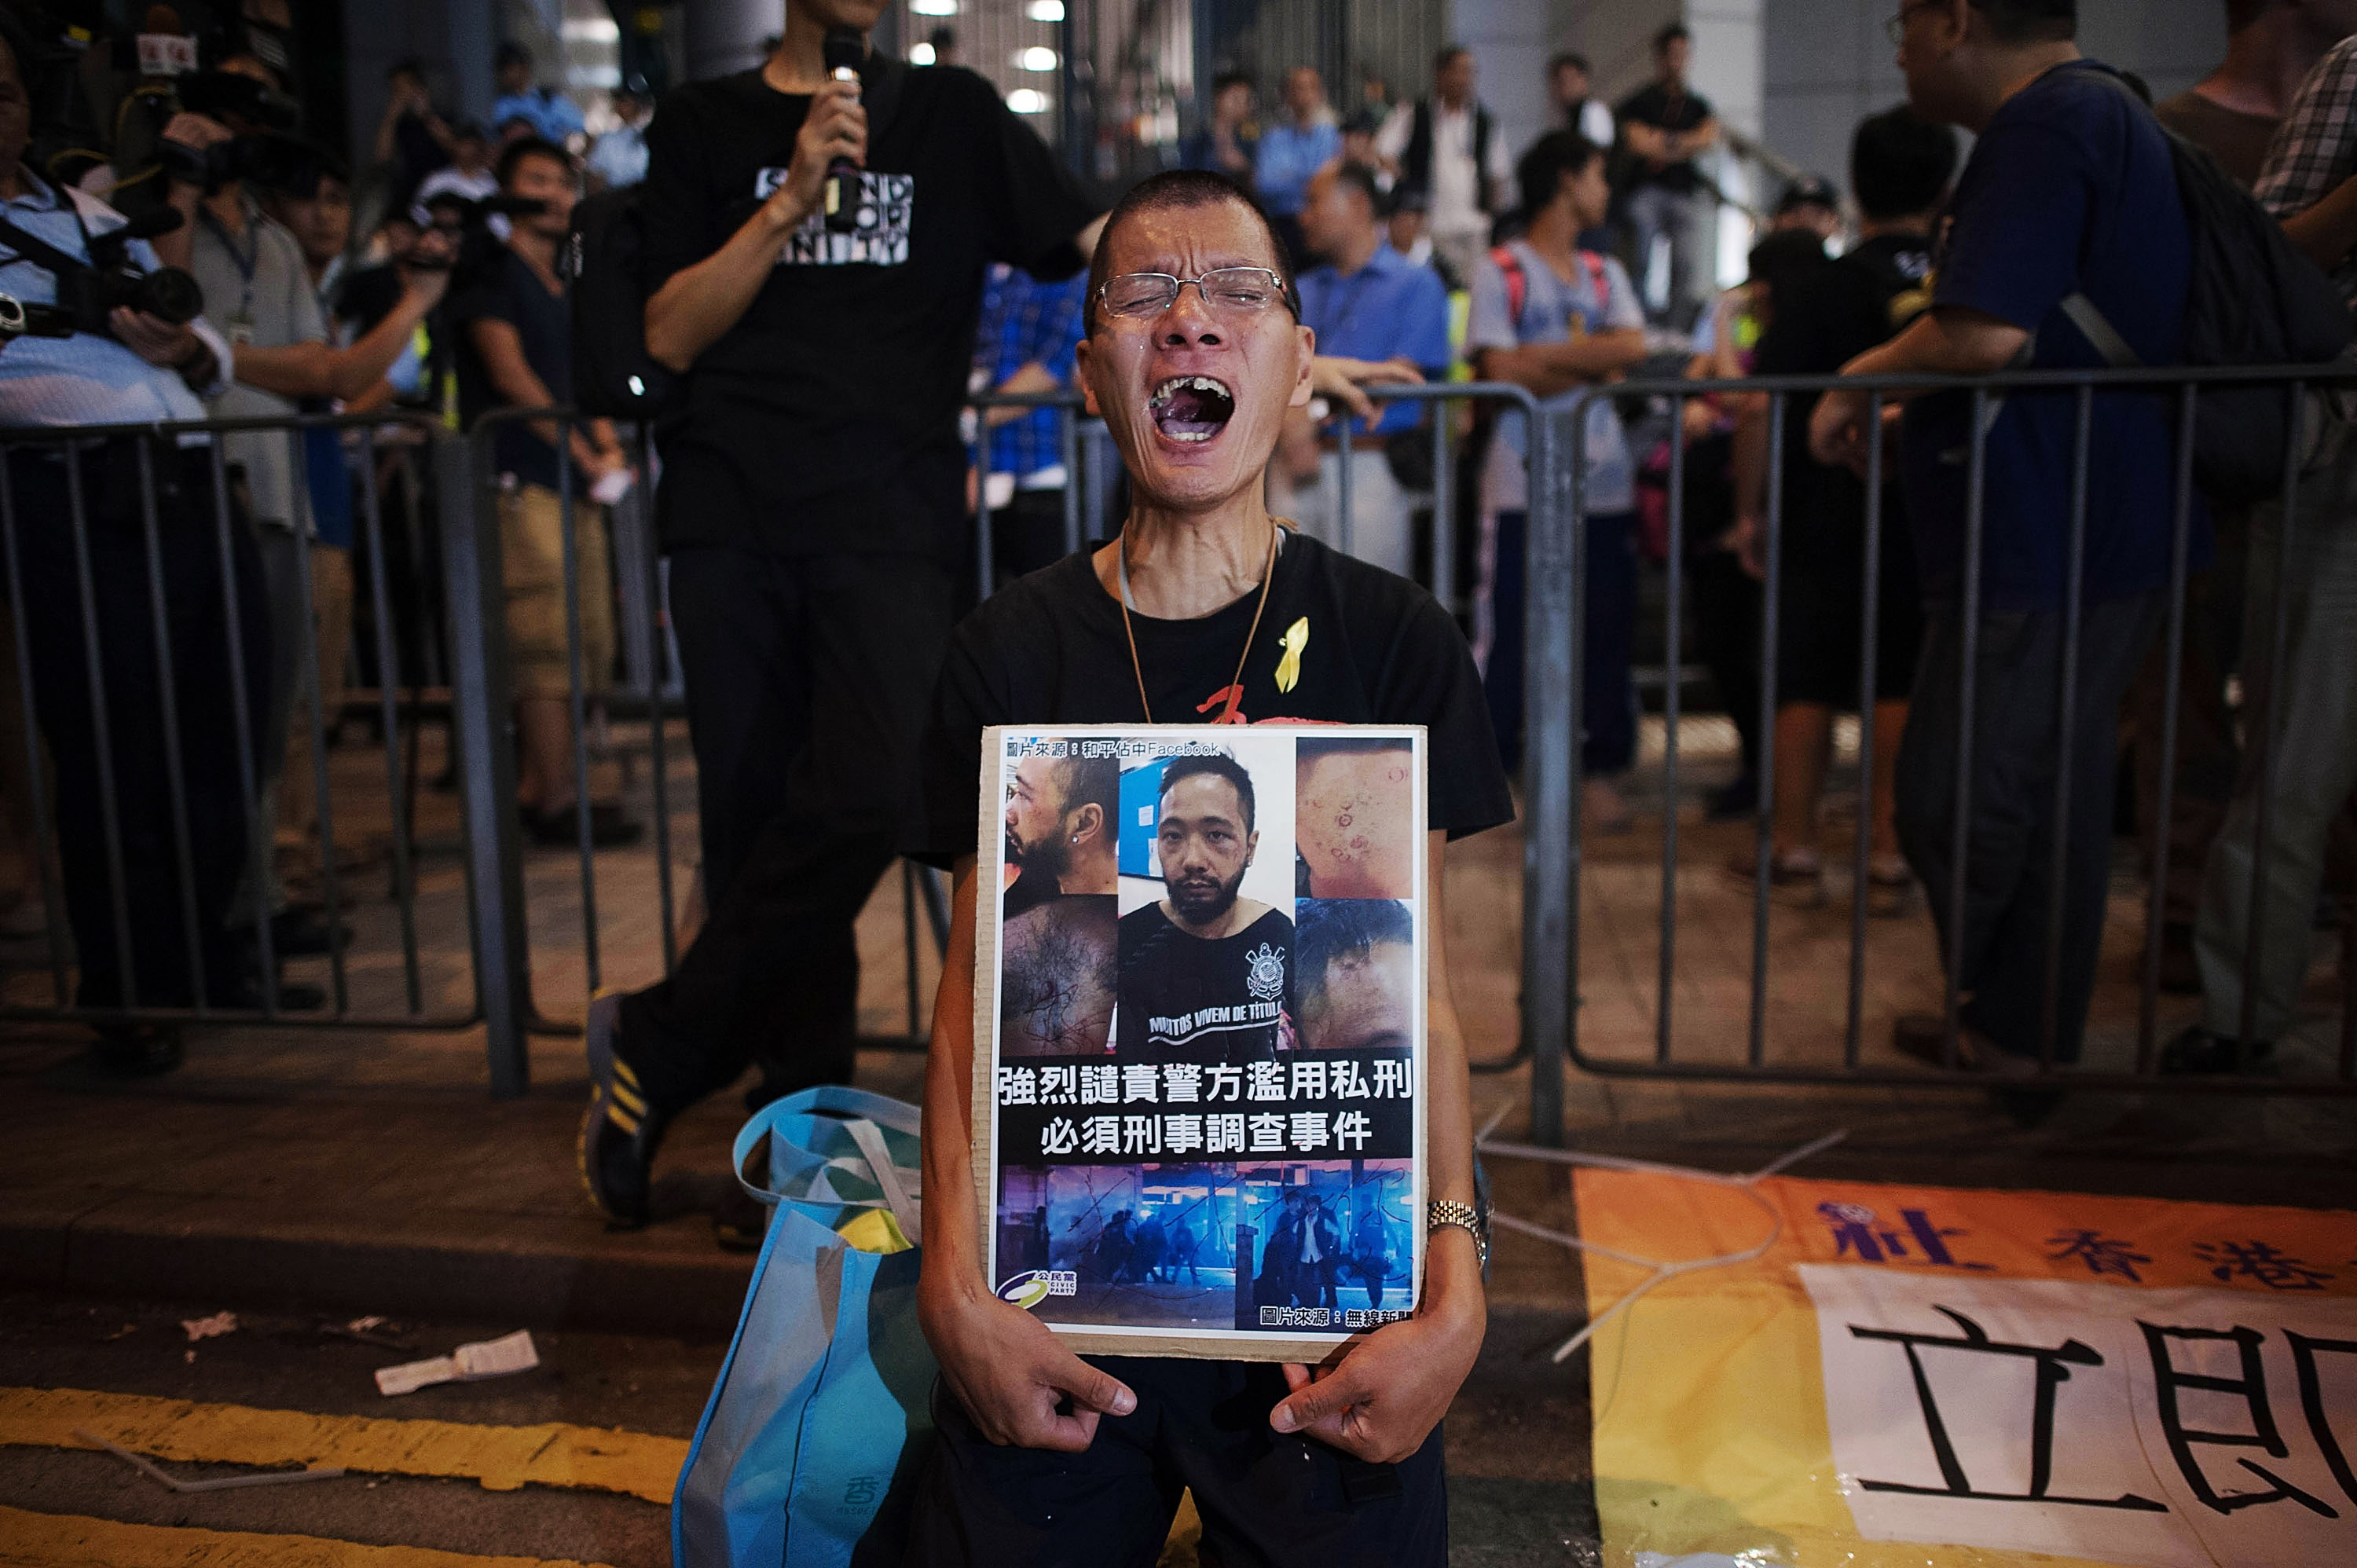 Police Move In To Clear Away Hong Kong Protest Sites